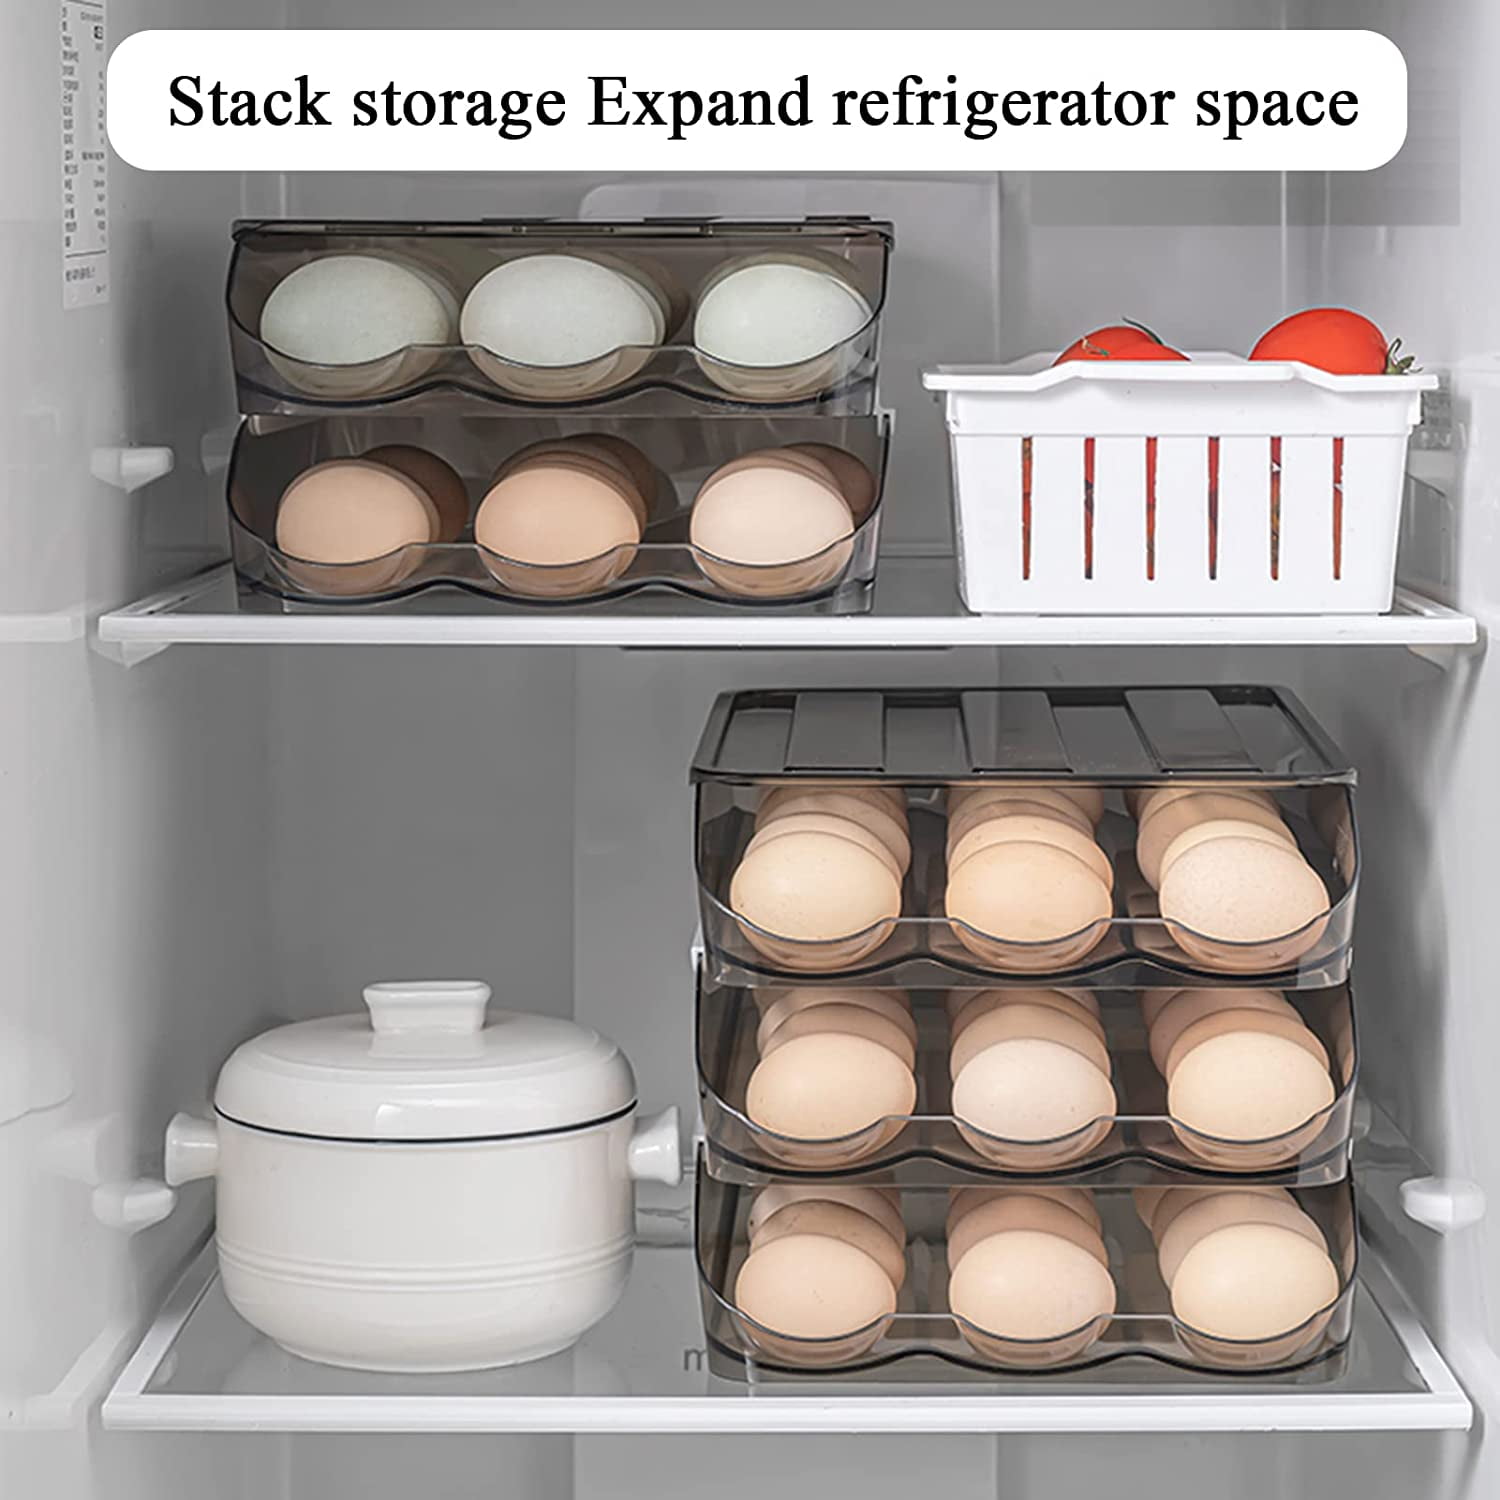  Sekonow Egg Holder for Refrigerator with Handle, Slim Rolling  Stackable Egg Organizer Egg Storage Container, Egg Dispenser Clear Egg Tray  Egg Cartons for Fridge Door and Countertop, 2 Layers 1 Row 